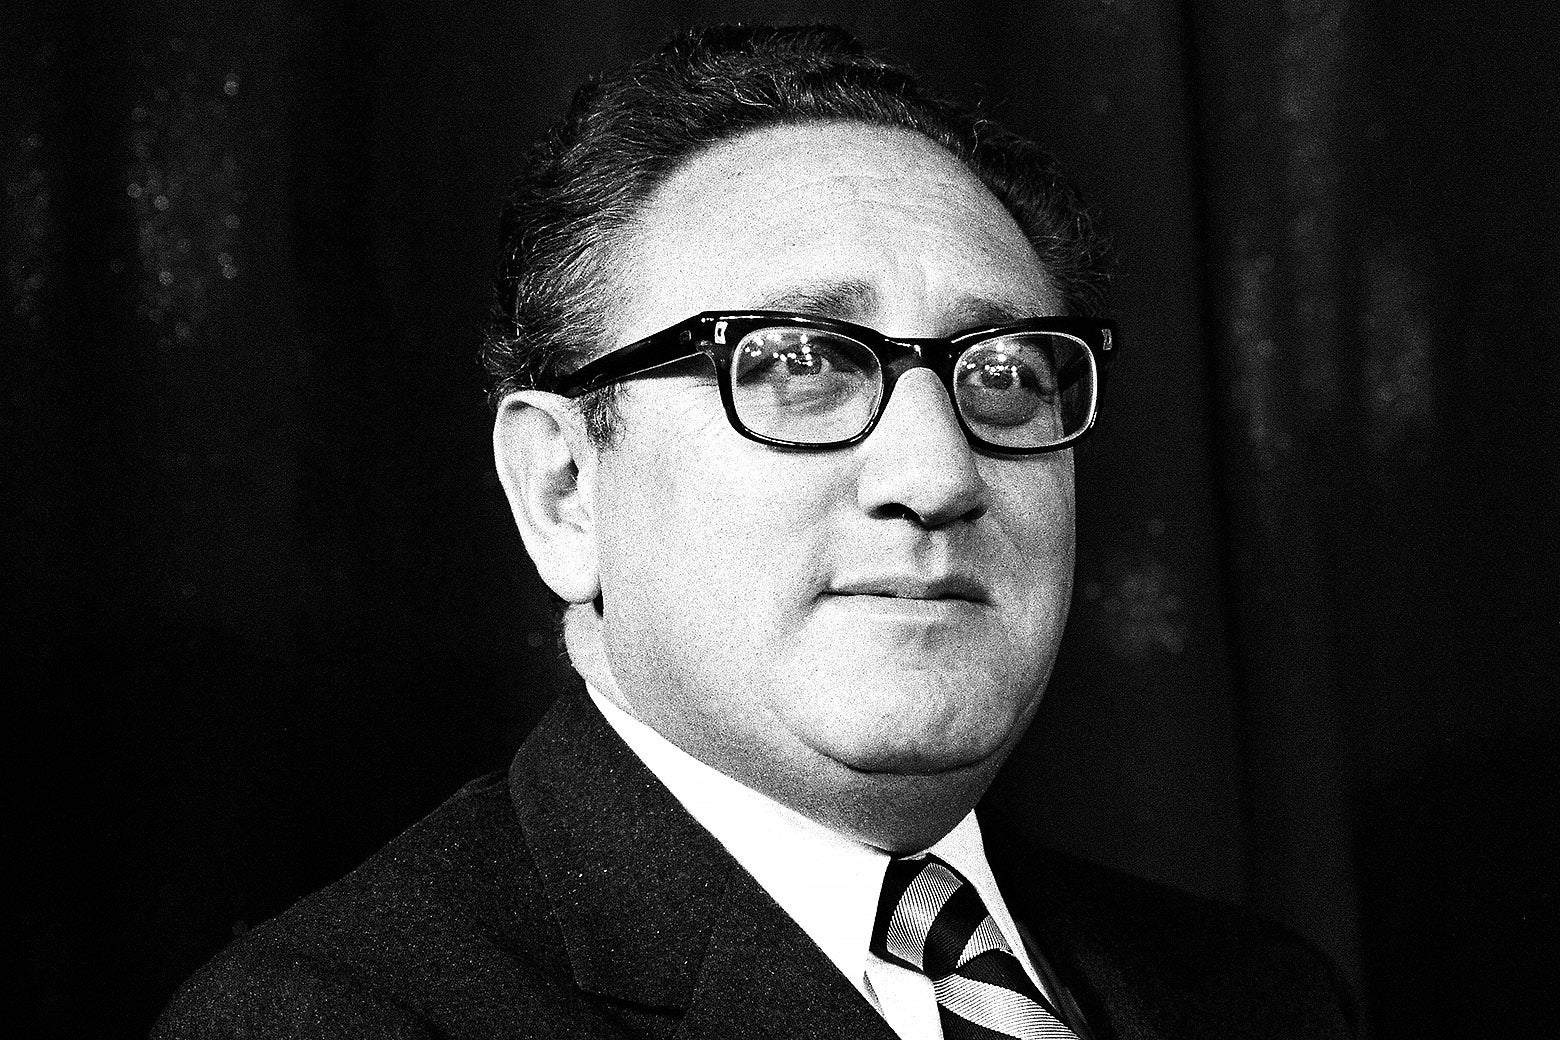 On Henry Kissinger's 100th birthday, these documents shed light on his bloody legacy.